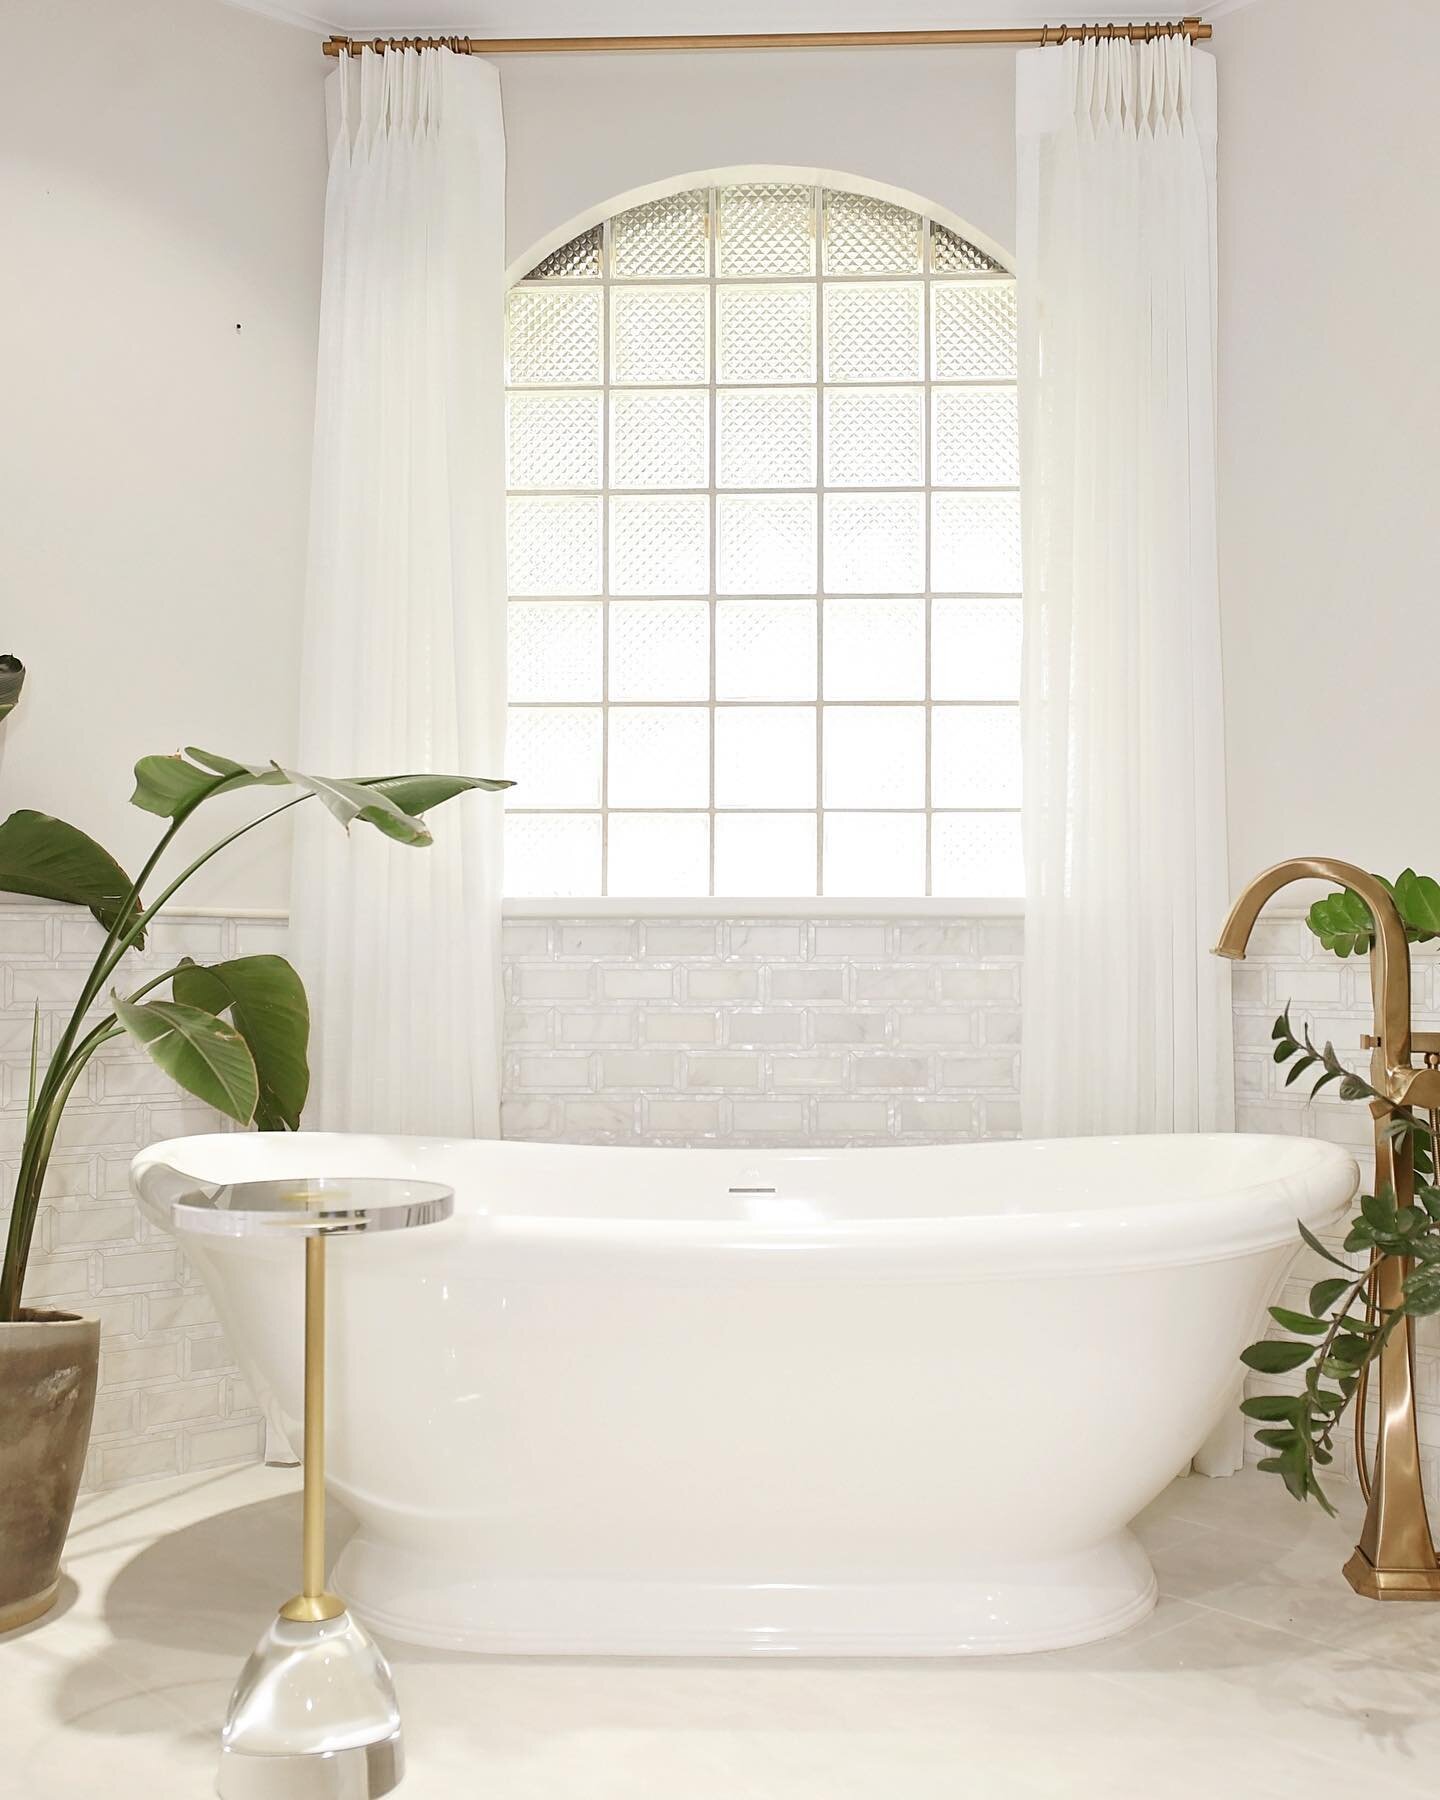 Our website has launched! Check out virginialanestudio.com for more information on our process, passion, and interior design projects. 

Swipe to see the before images of this beautiful master bathroom transformation. 

To see more of our work, click